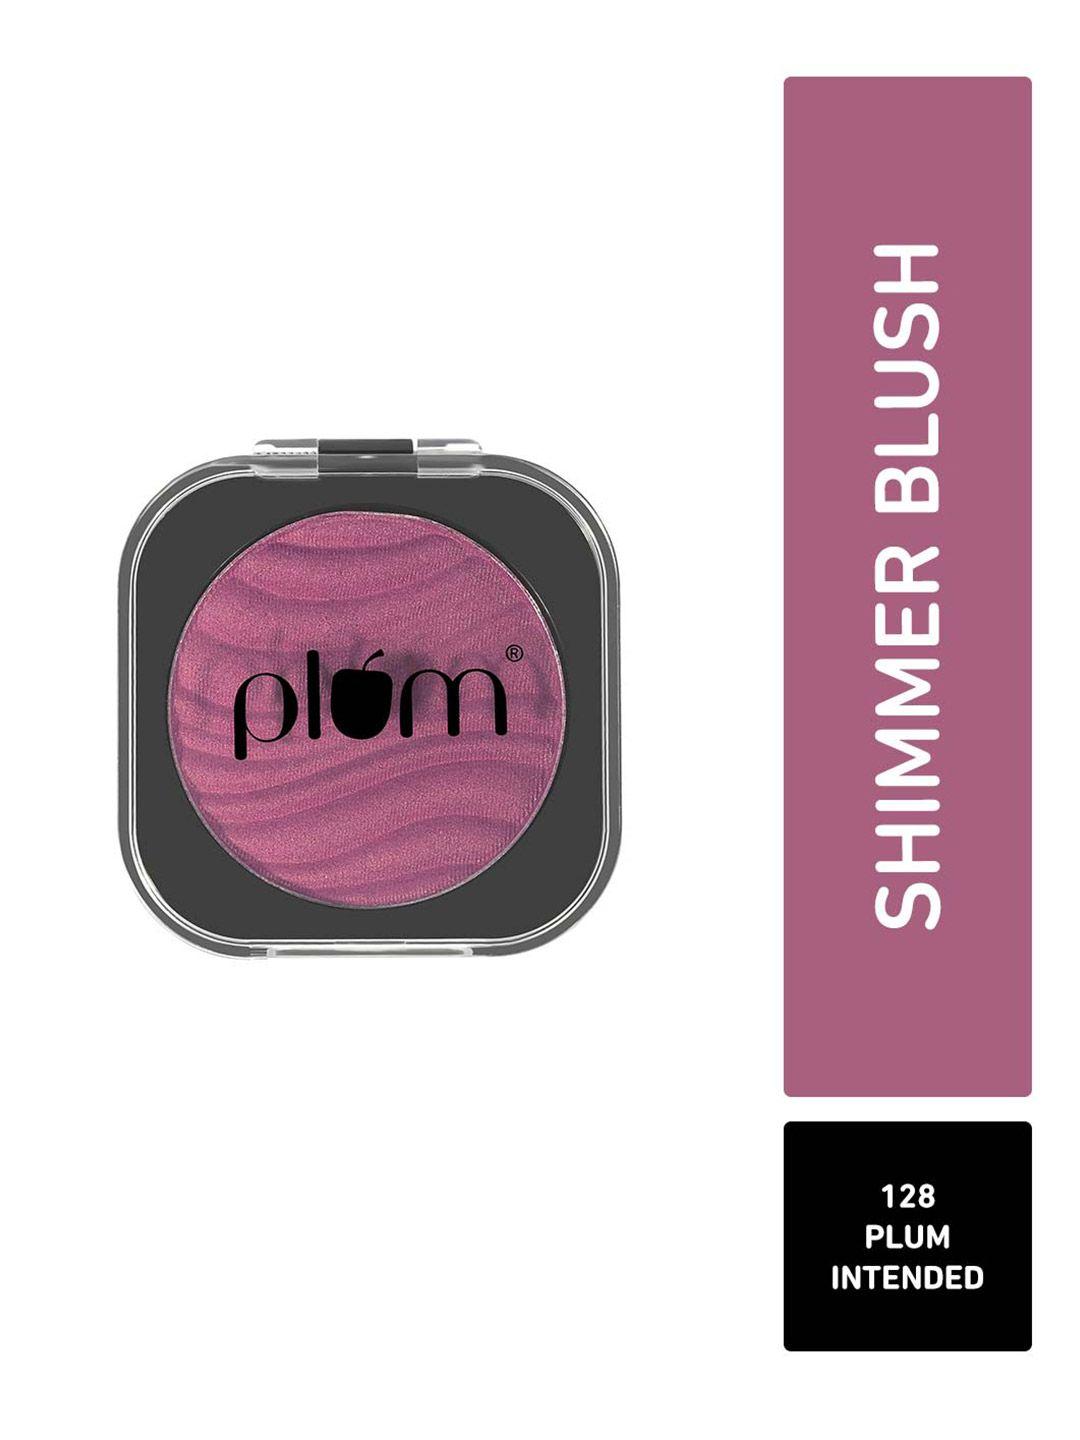 plum cheek-a-boo highly-pigmented shimmer blush 4.5g - plum intended 128